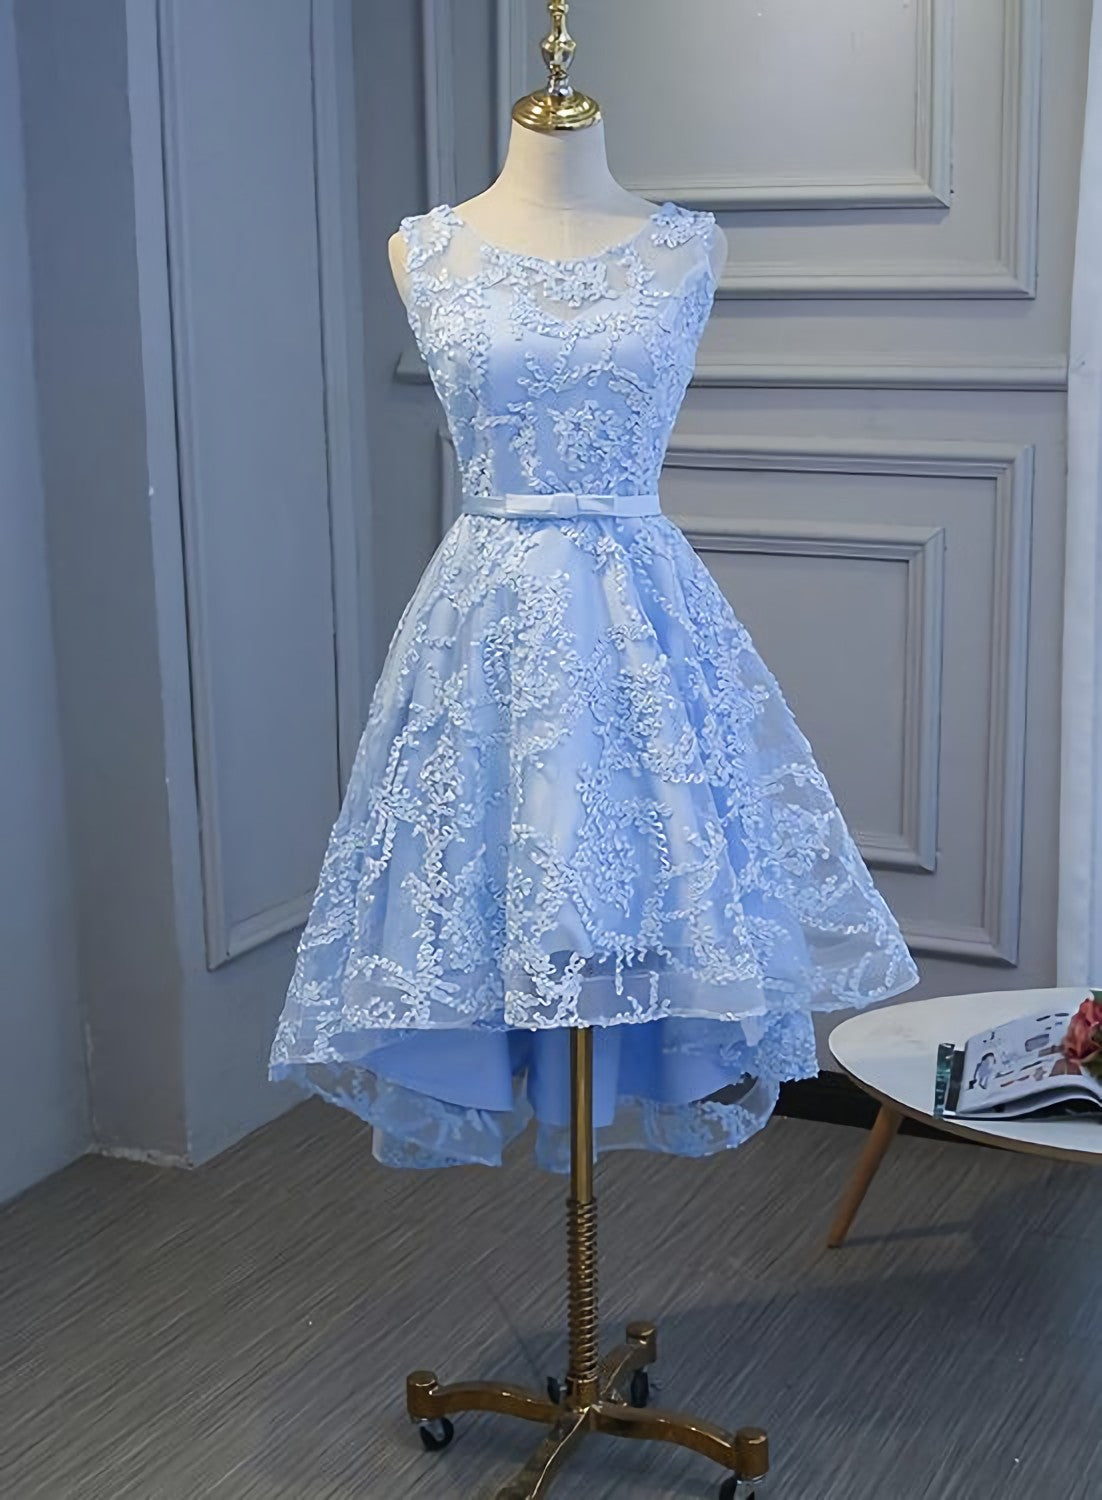 Homemade Ranch Dress, Light Blue High Low Homecoming Dresses, Blue Party Dress With Belt Cute Formal Dresse